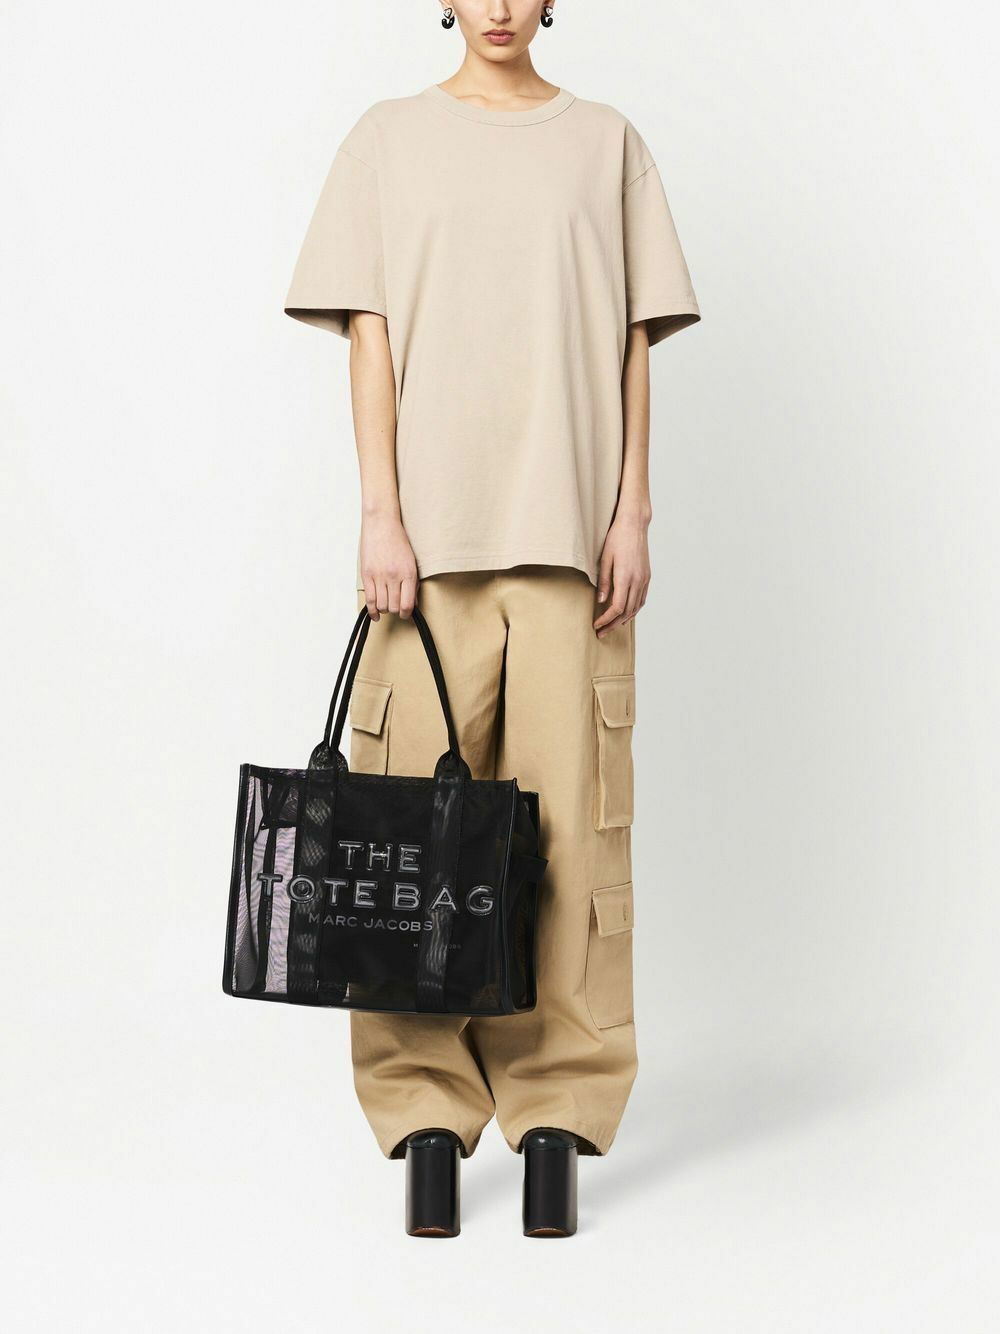 The Large Tote Bag, Marc Jacobs